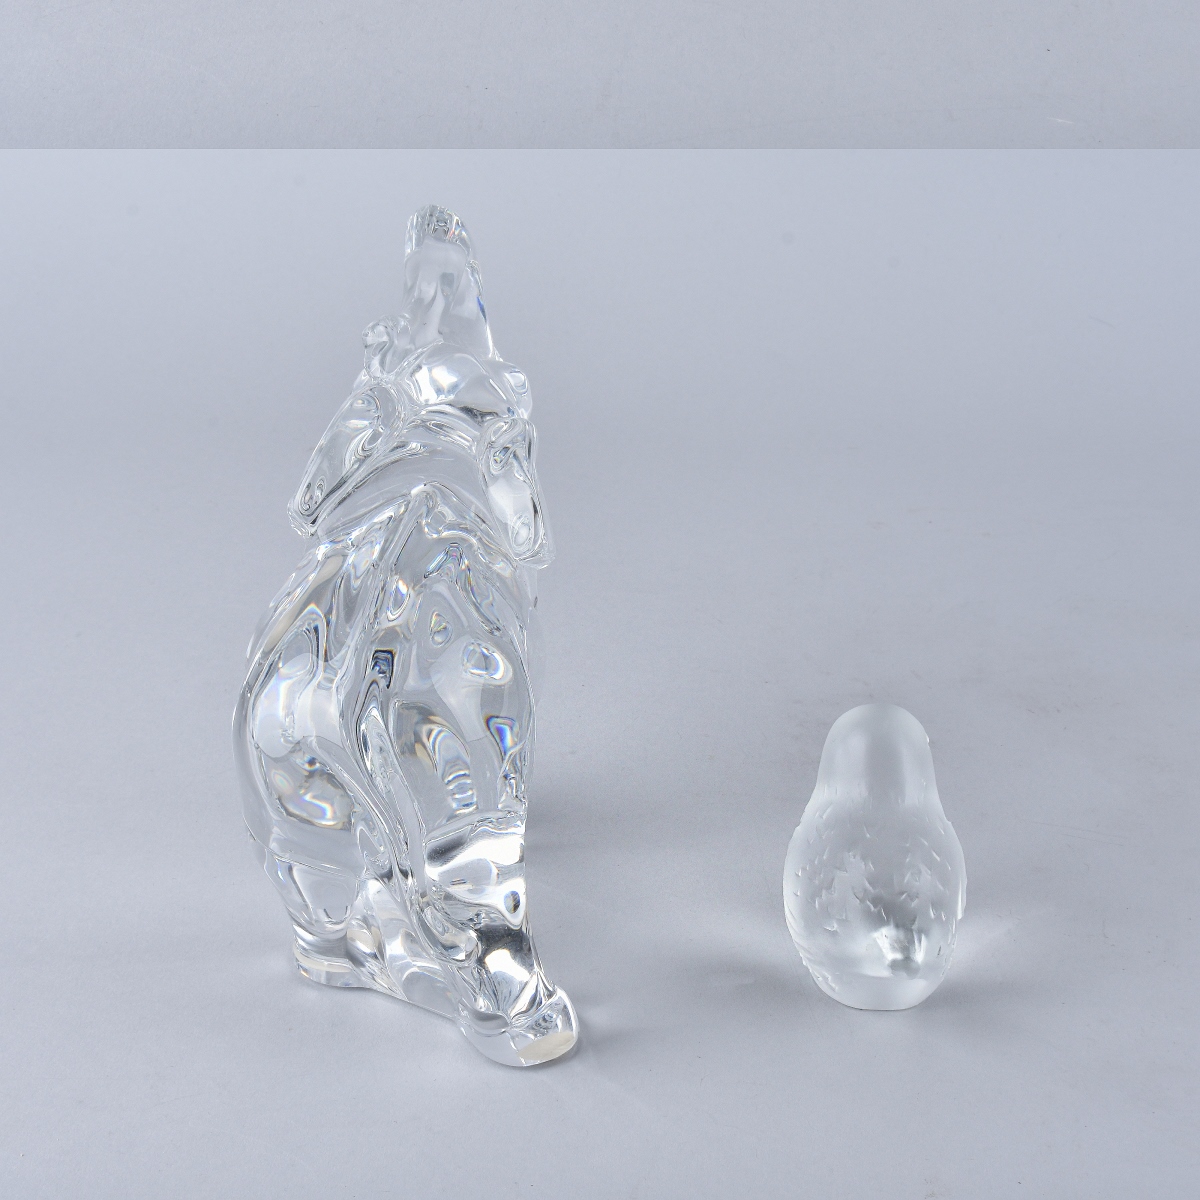 Two Vintage Crystal Figurines Elephant and Bird - Image 2 of 3